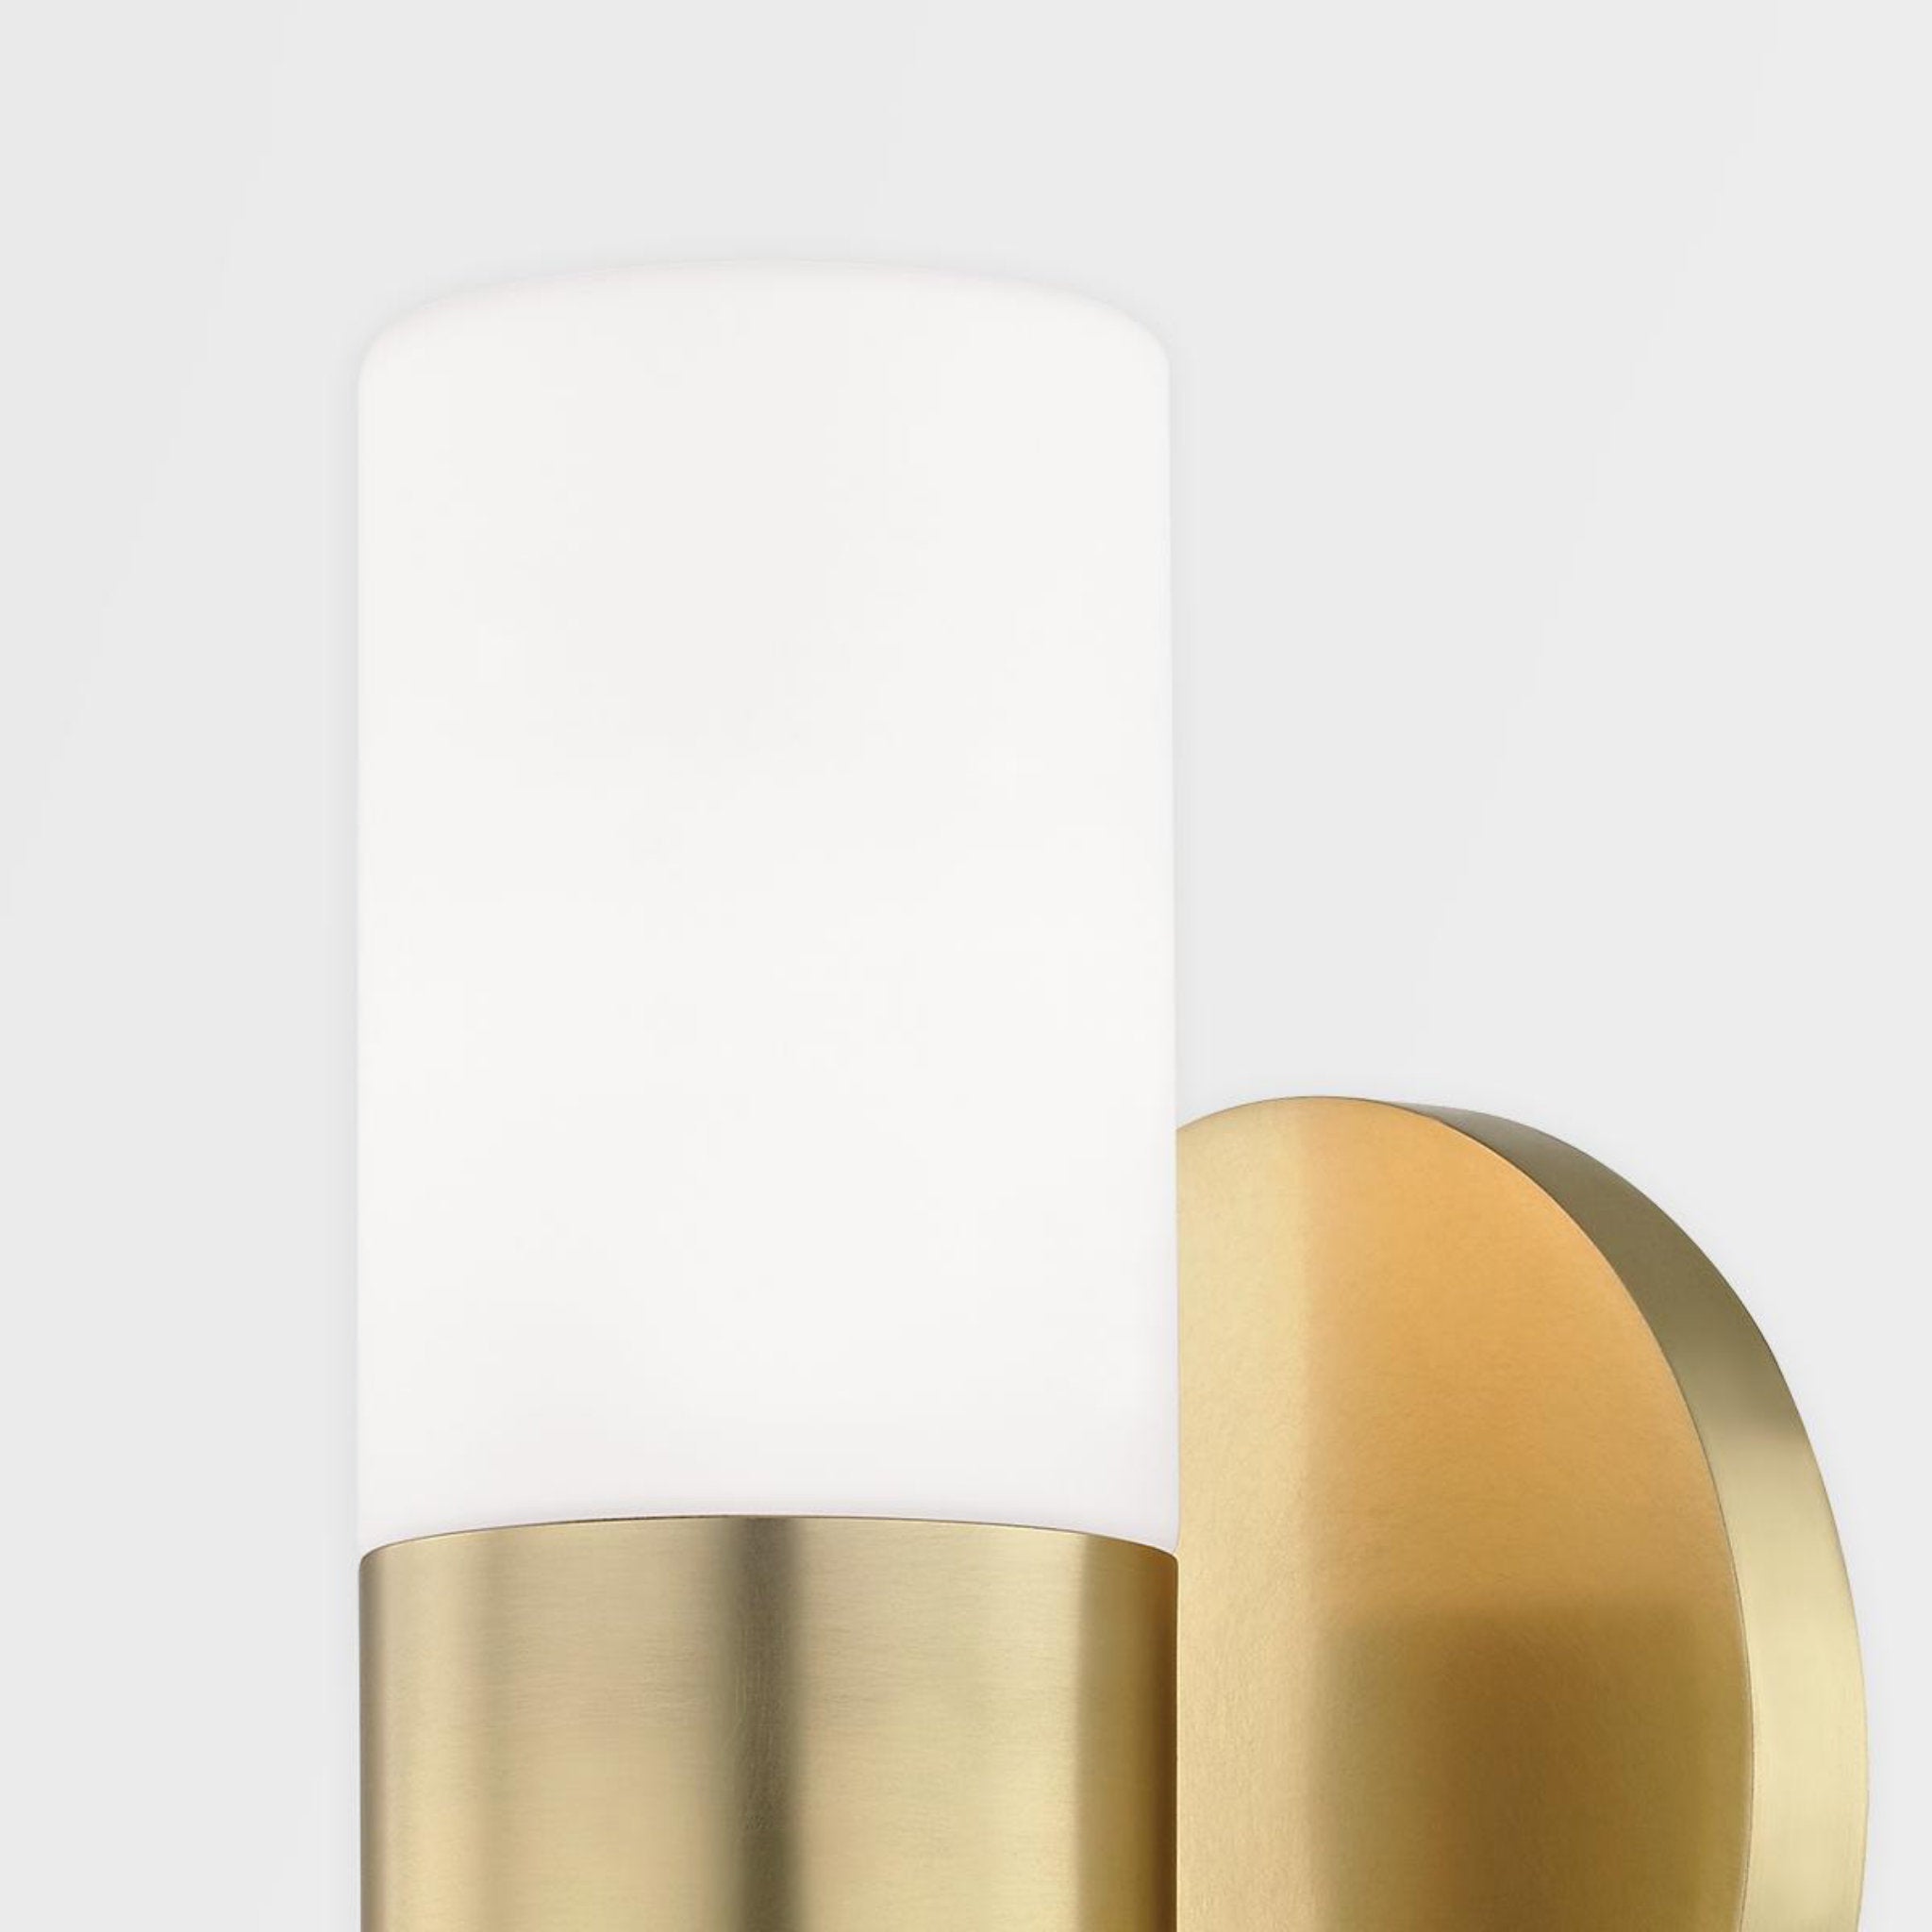 Lola 2-Light Wall Sconce in Aged Brass